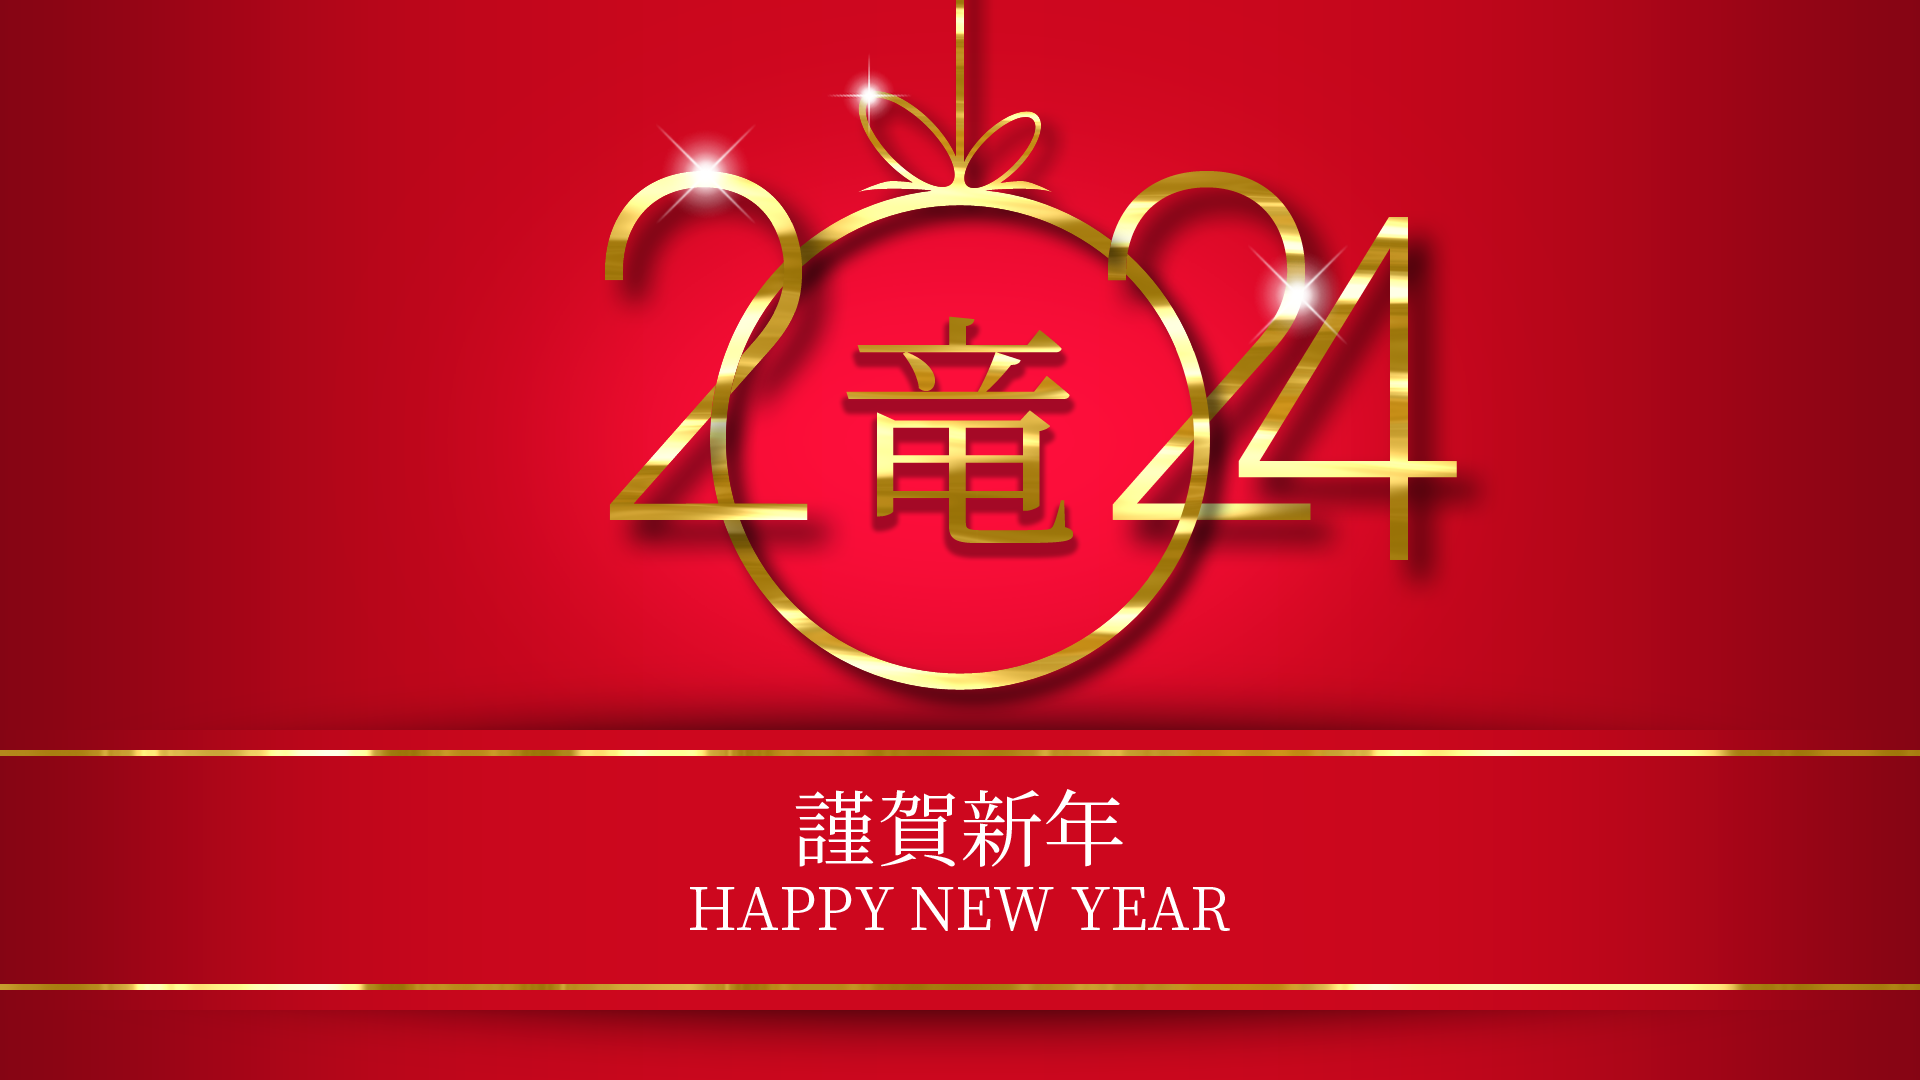 General 1920x1080 2024 (year) New Year digital art simple background Chinese red background minimalism